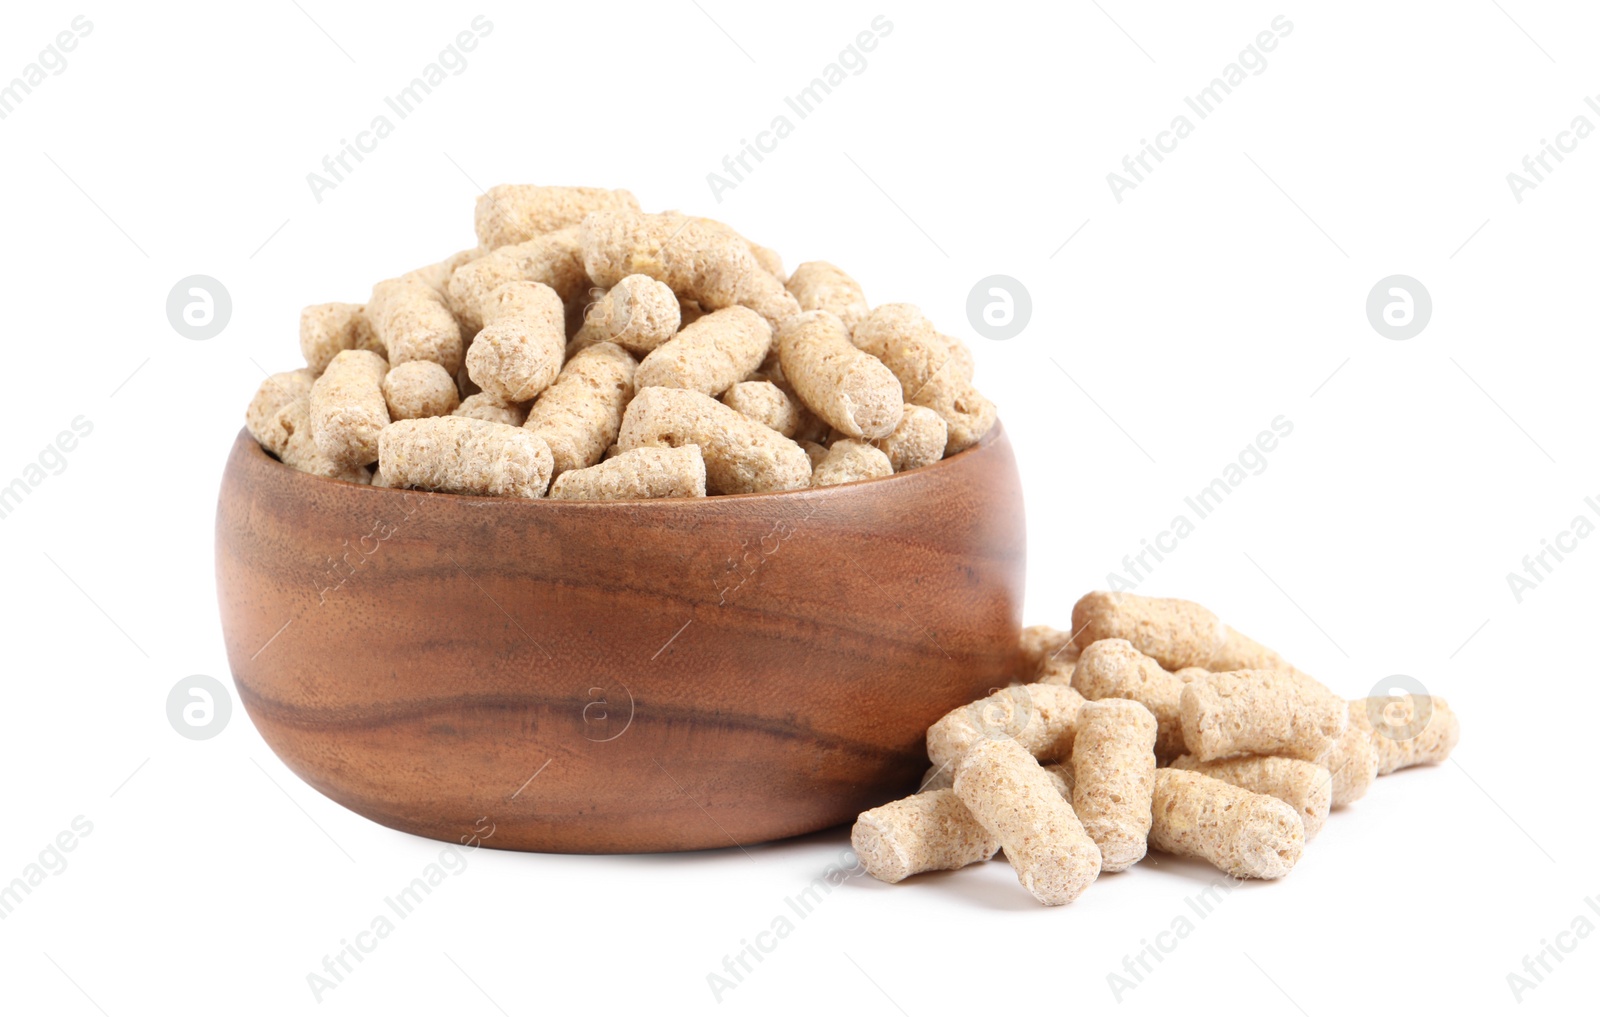 Photo of Granulated wheat bran in bowl on white background